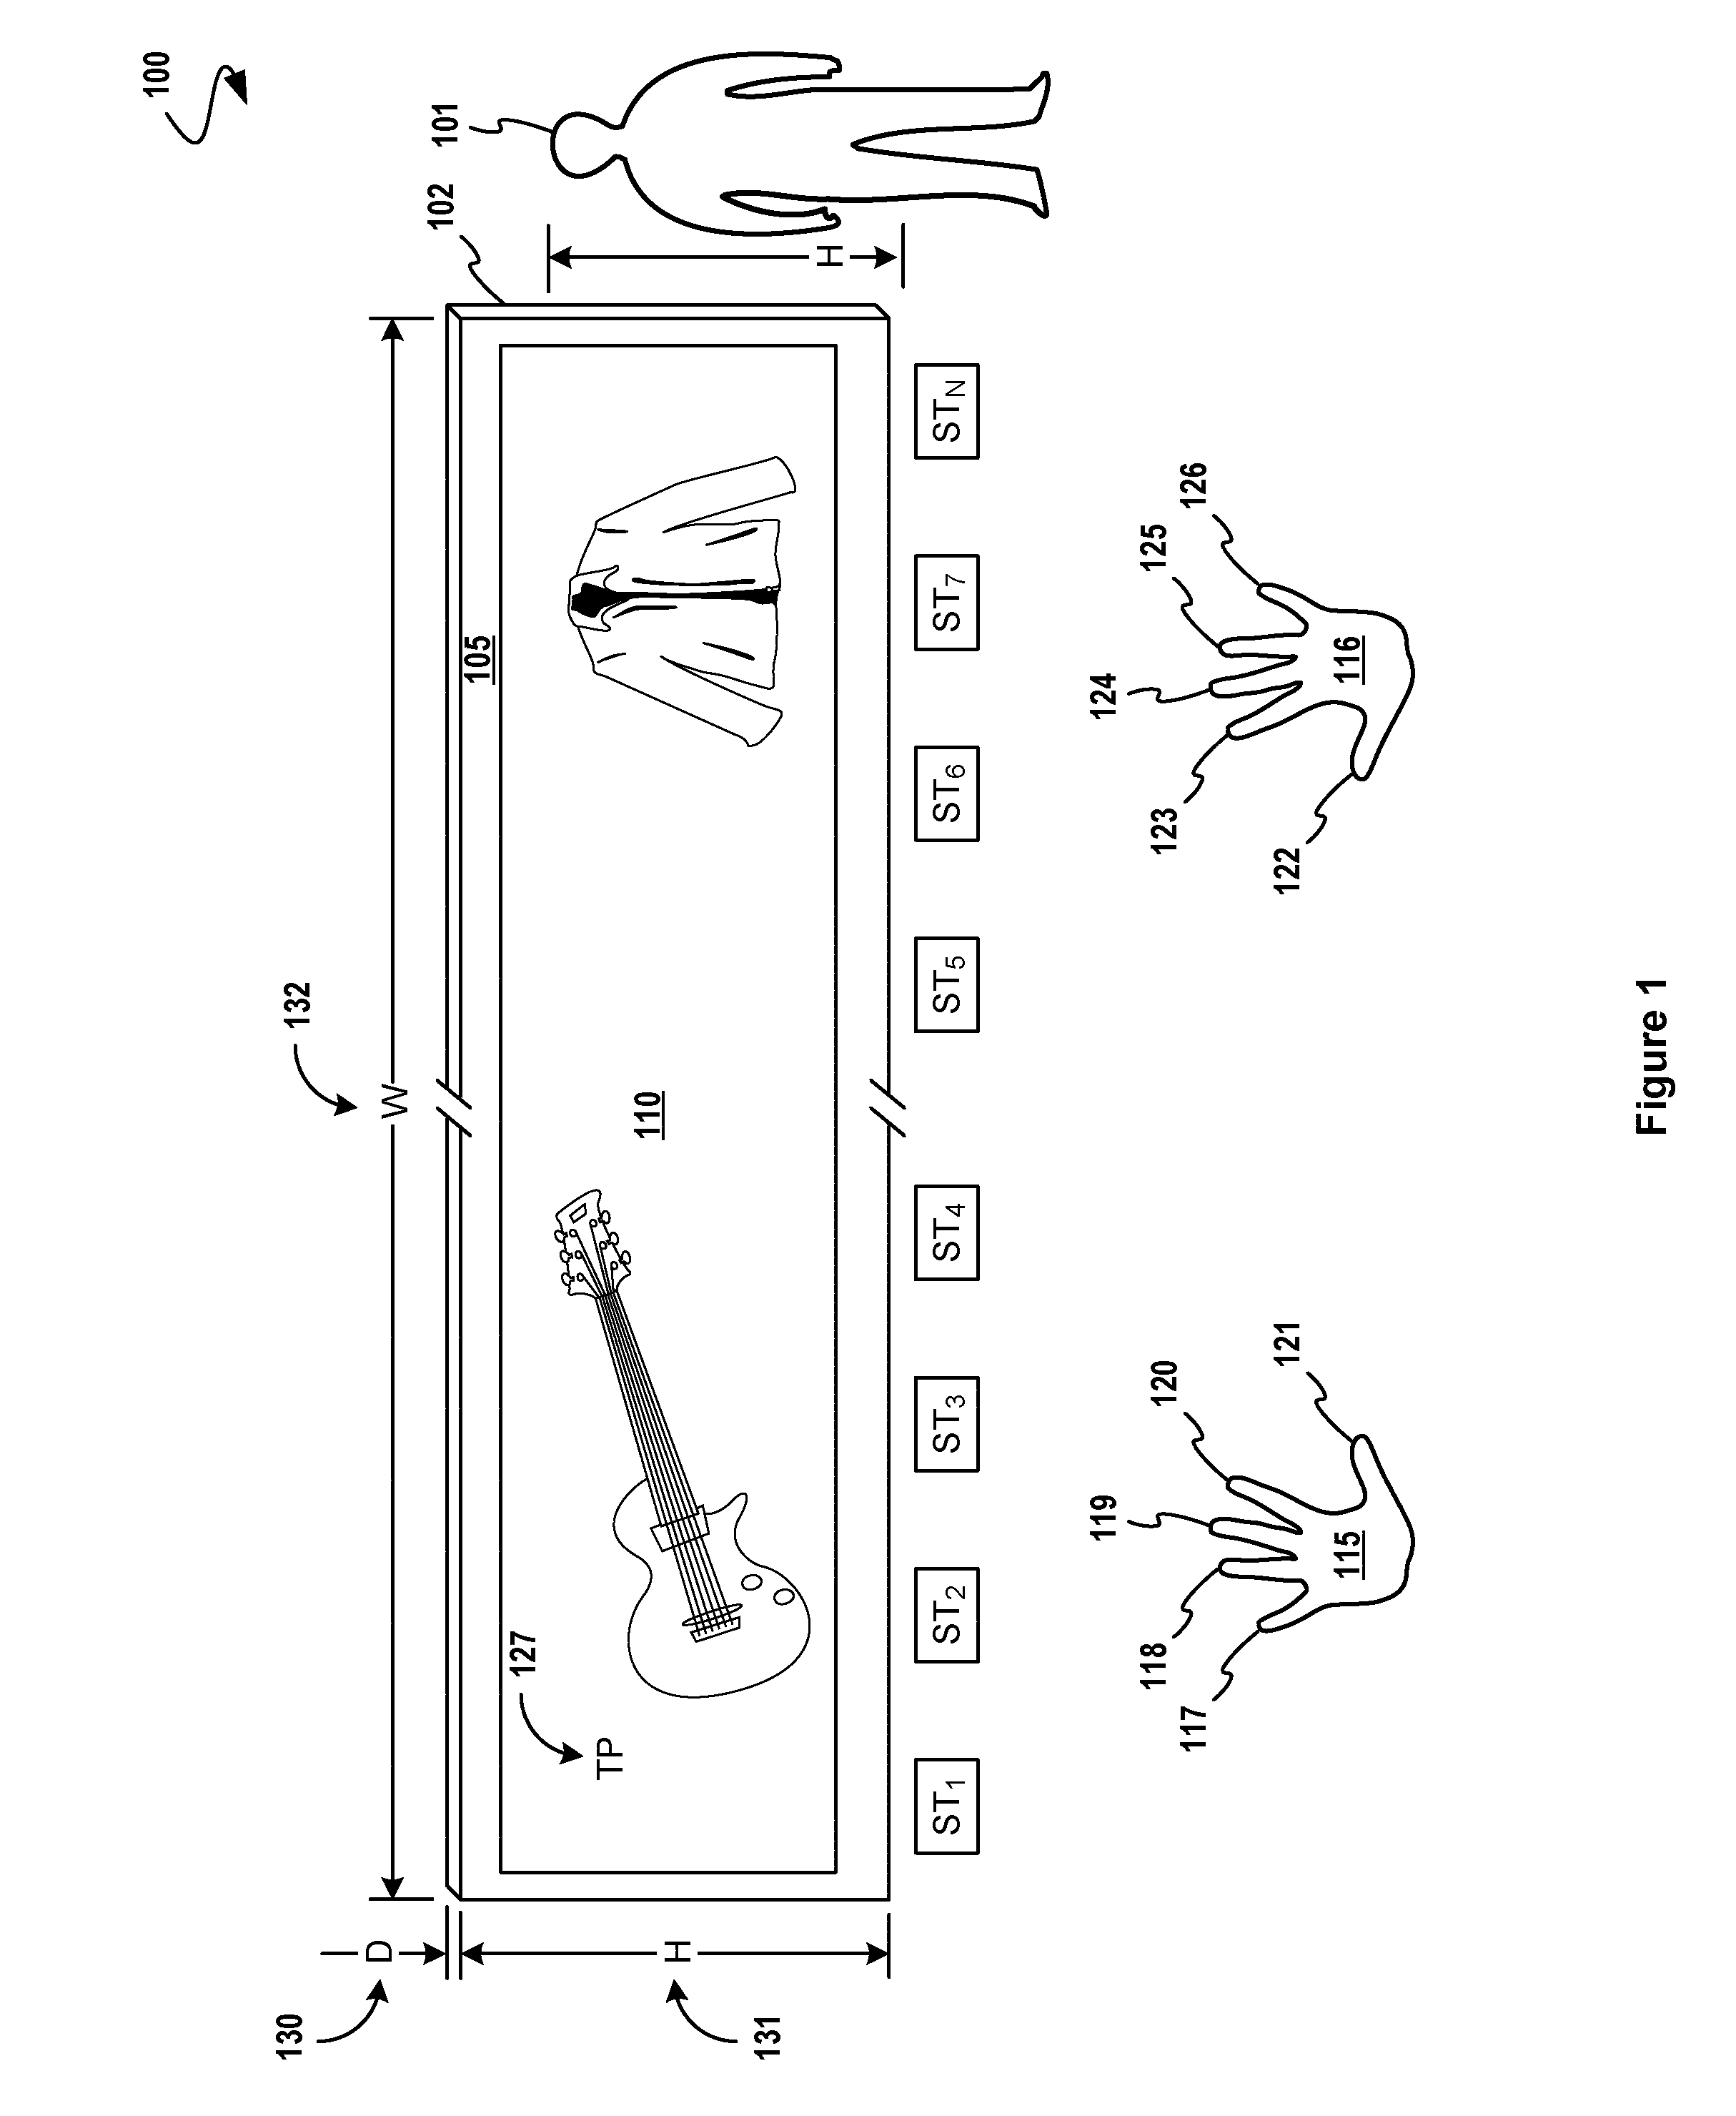 Spatial Apportioning of Audio in a Large Scale Multi-User, Multi-Touch System